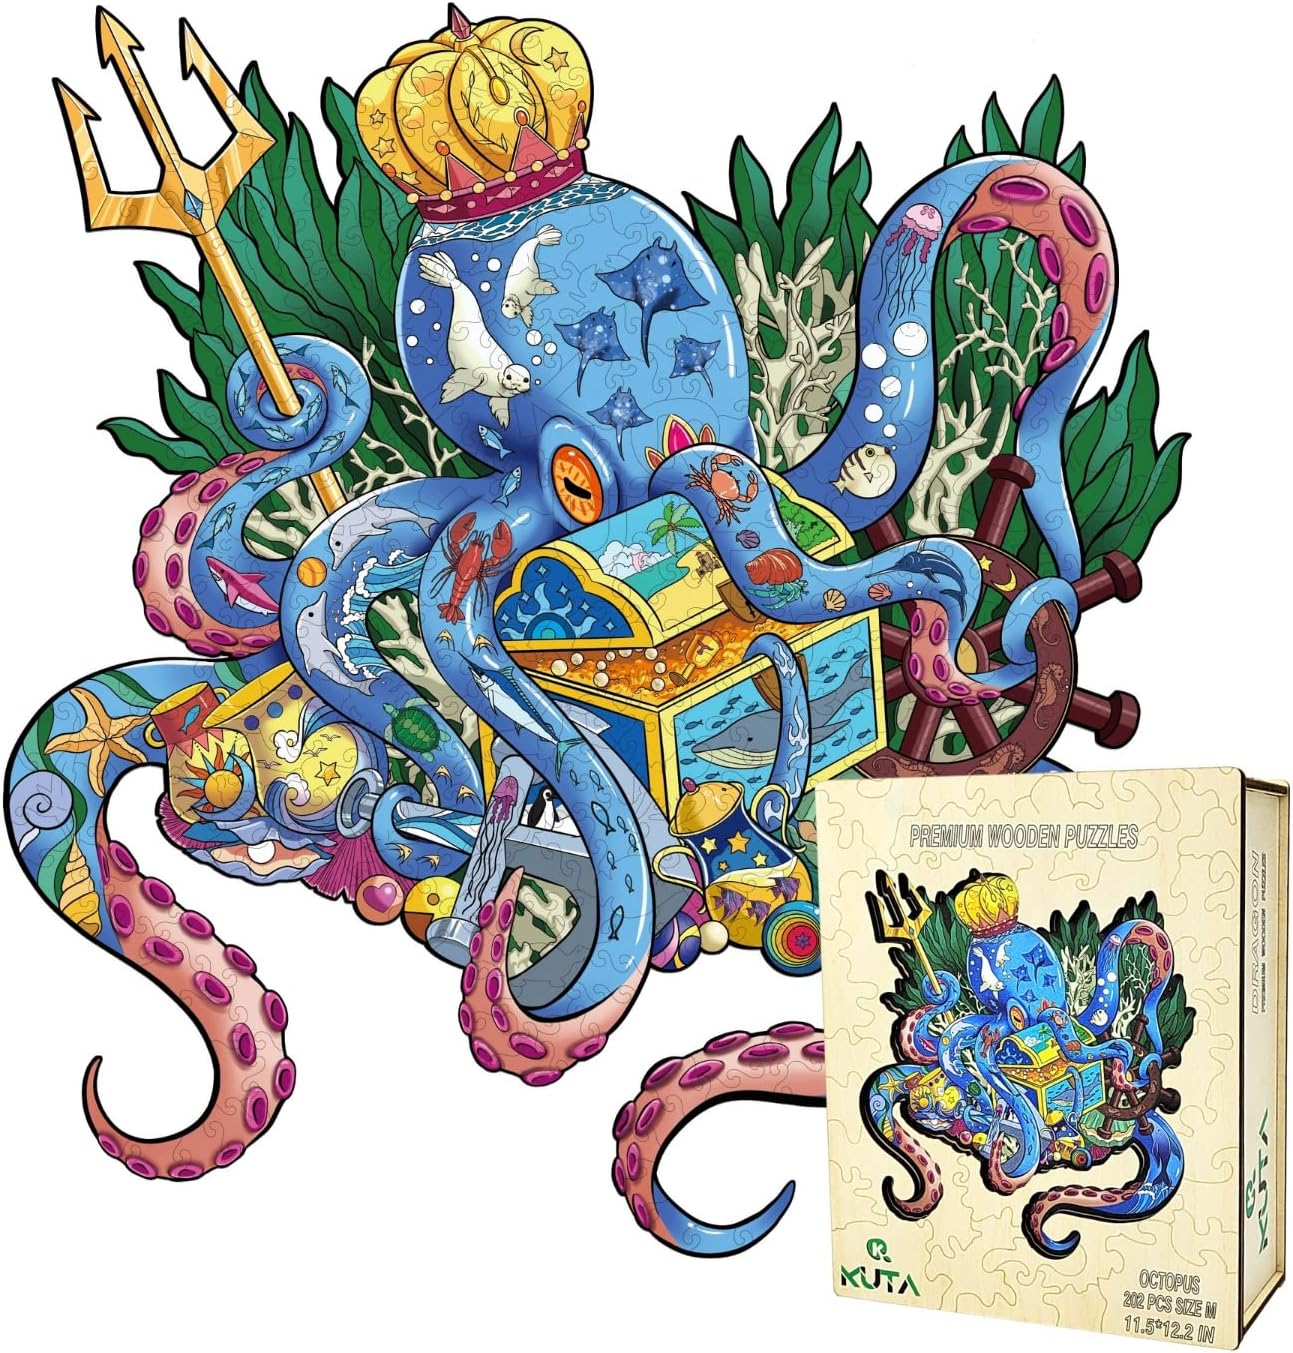 KUTA Wooden Jigsaw Puzzles, Unique Animal Shape, Set with Wall Mounting Kits for Decoration, Best Gift for Children and Adults (Octopus)